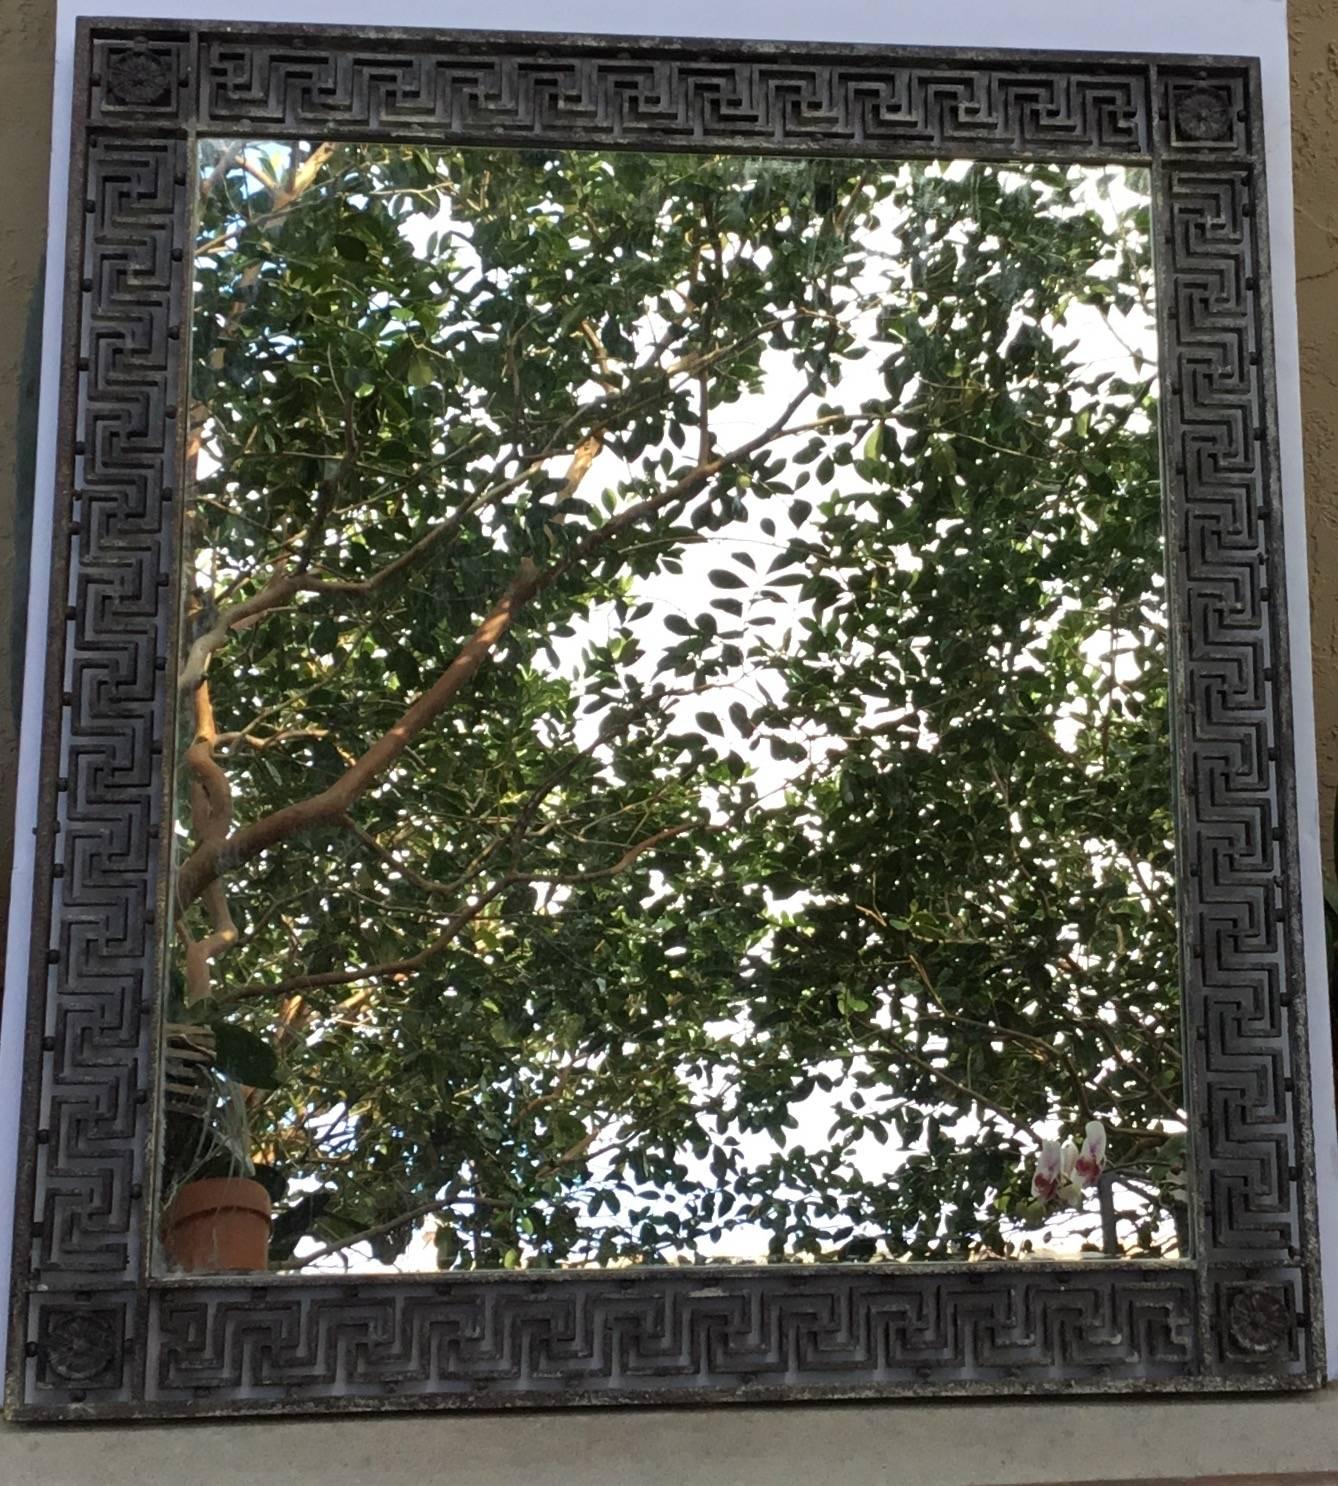 Elegant one of a kind mirror made of iron, with beautiful Greek key motif.
Could use horizontally or vertically.